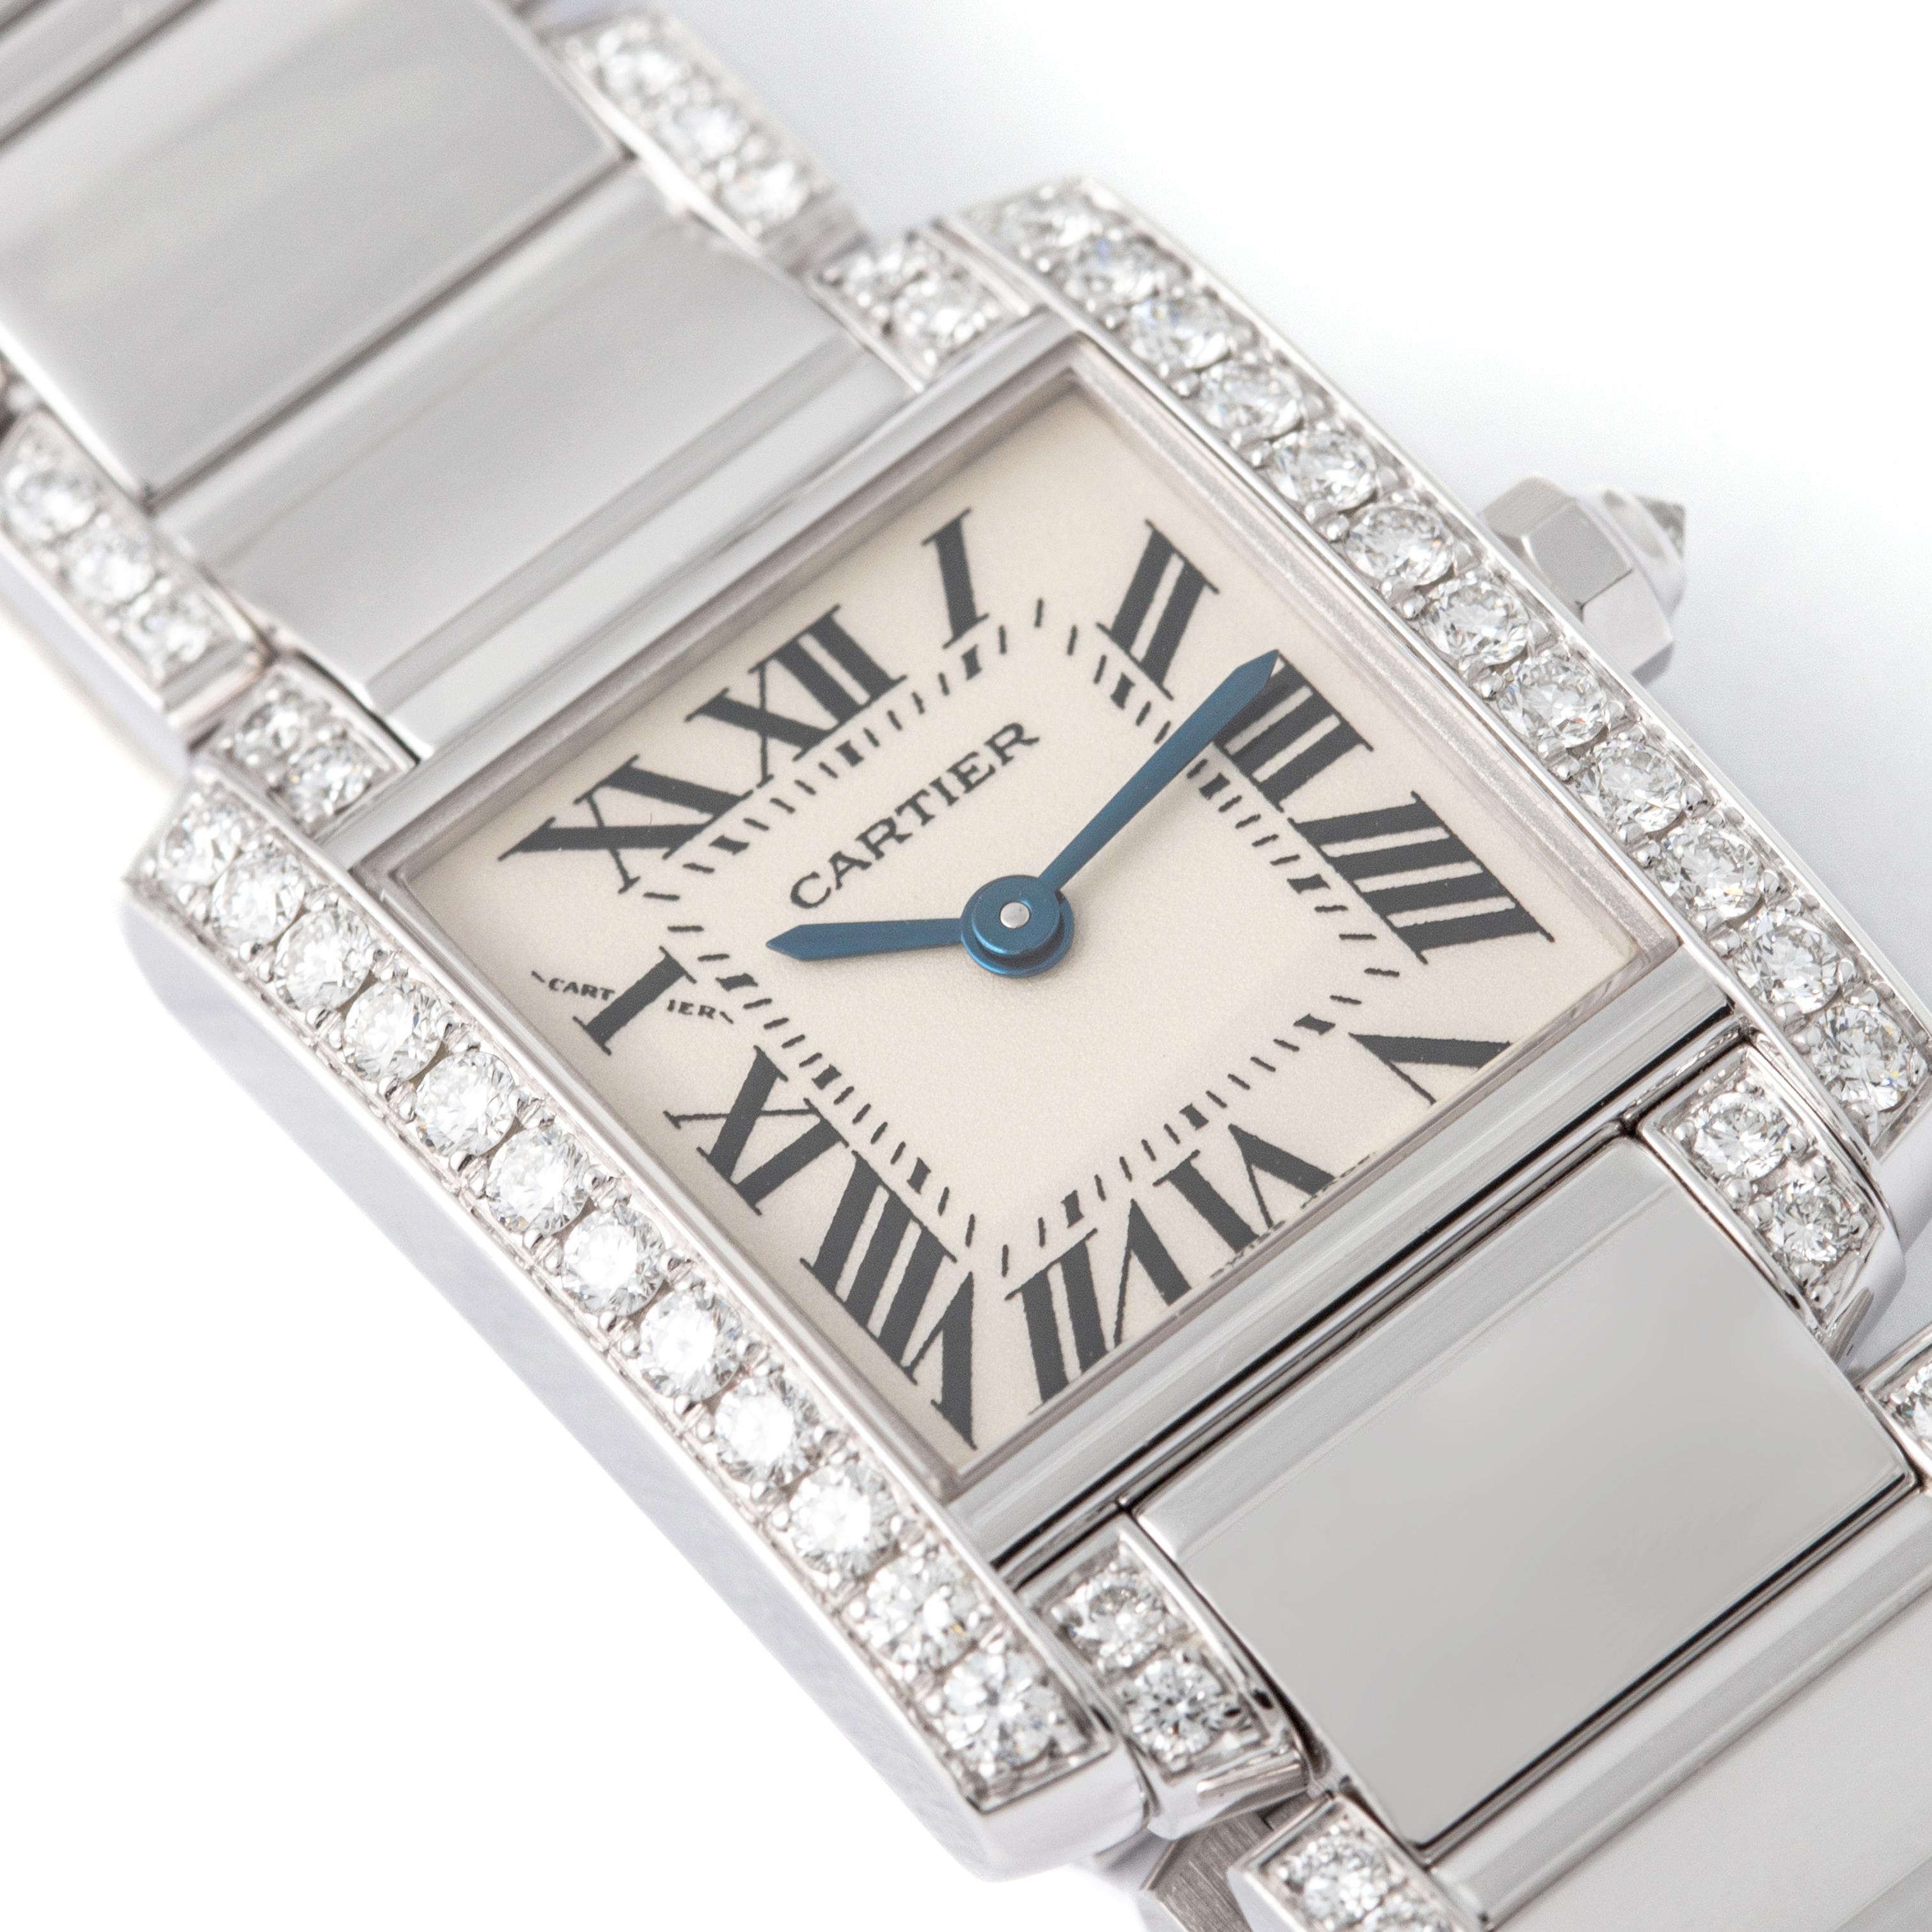 Cartier 'Tank Francaise' White Gold 18K and Diamond Ladies Watch

Authentic Cartier 'Tank Francaise' watch crafted in white gold 18K. The rectangular case is set with high-quality round brilliant cut diamonds and the octagonal crown is set with one